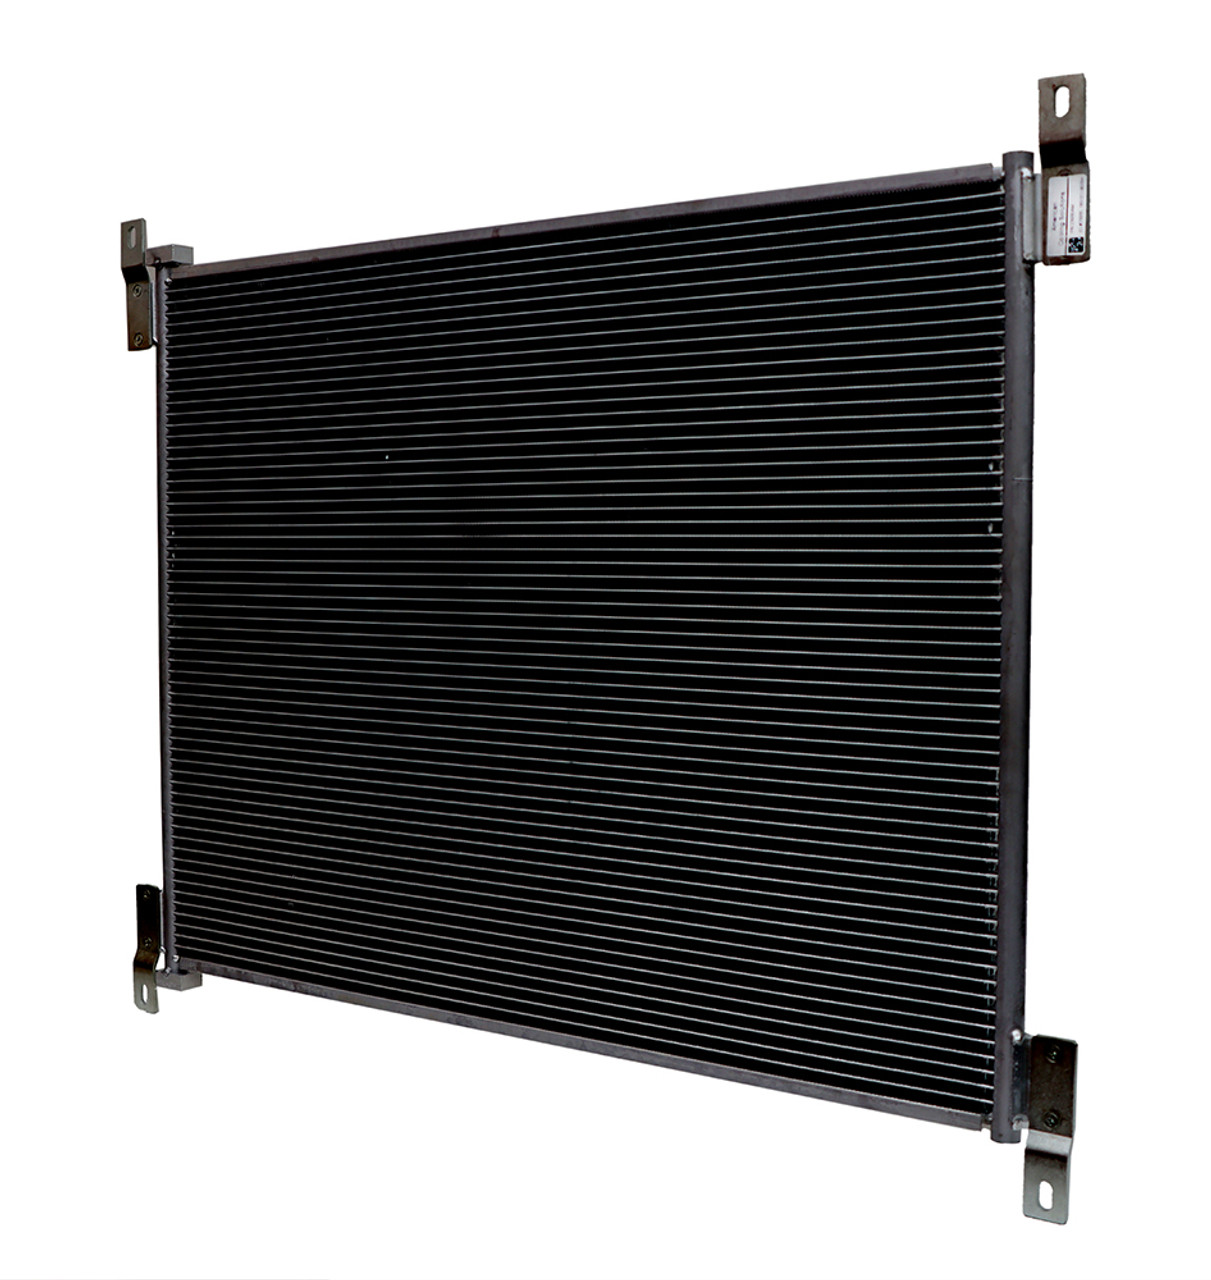 SCITOO AC A/C Condenser 2505-001 fits for 1996-2006 T2000 1996-2007 Kenworth T2000 